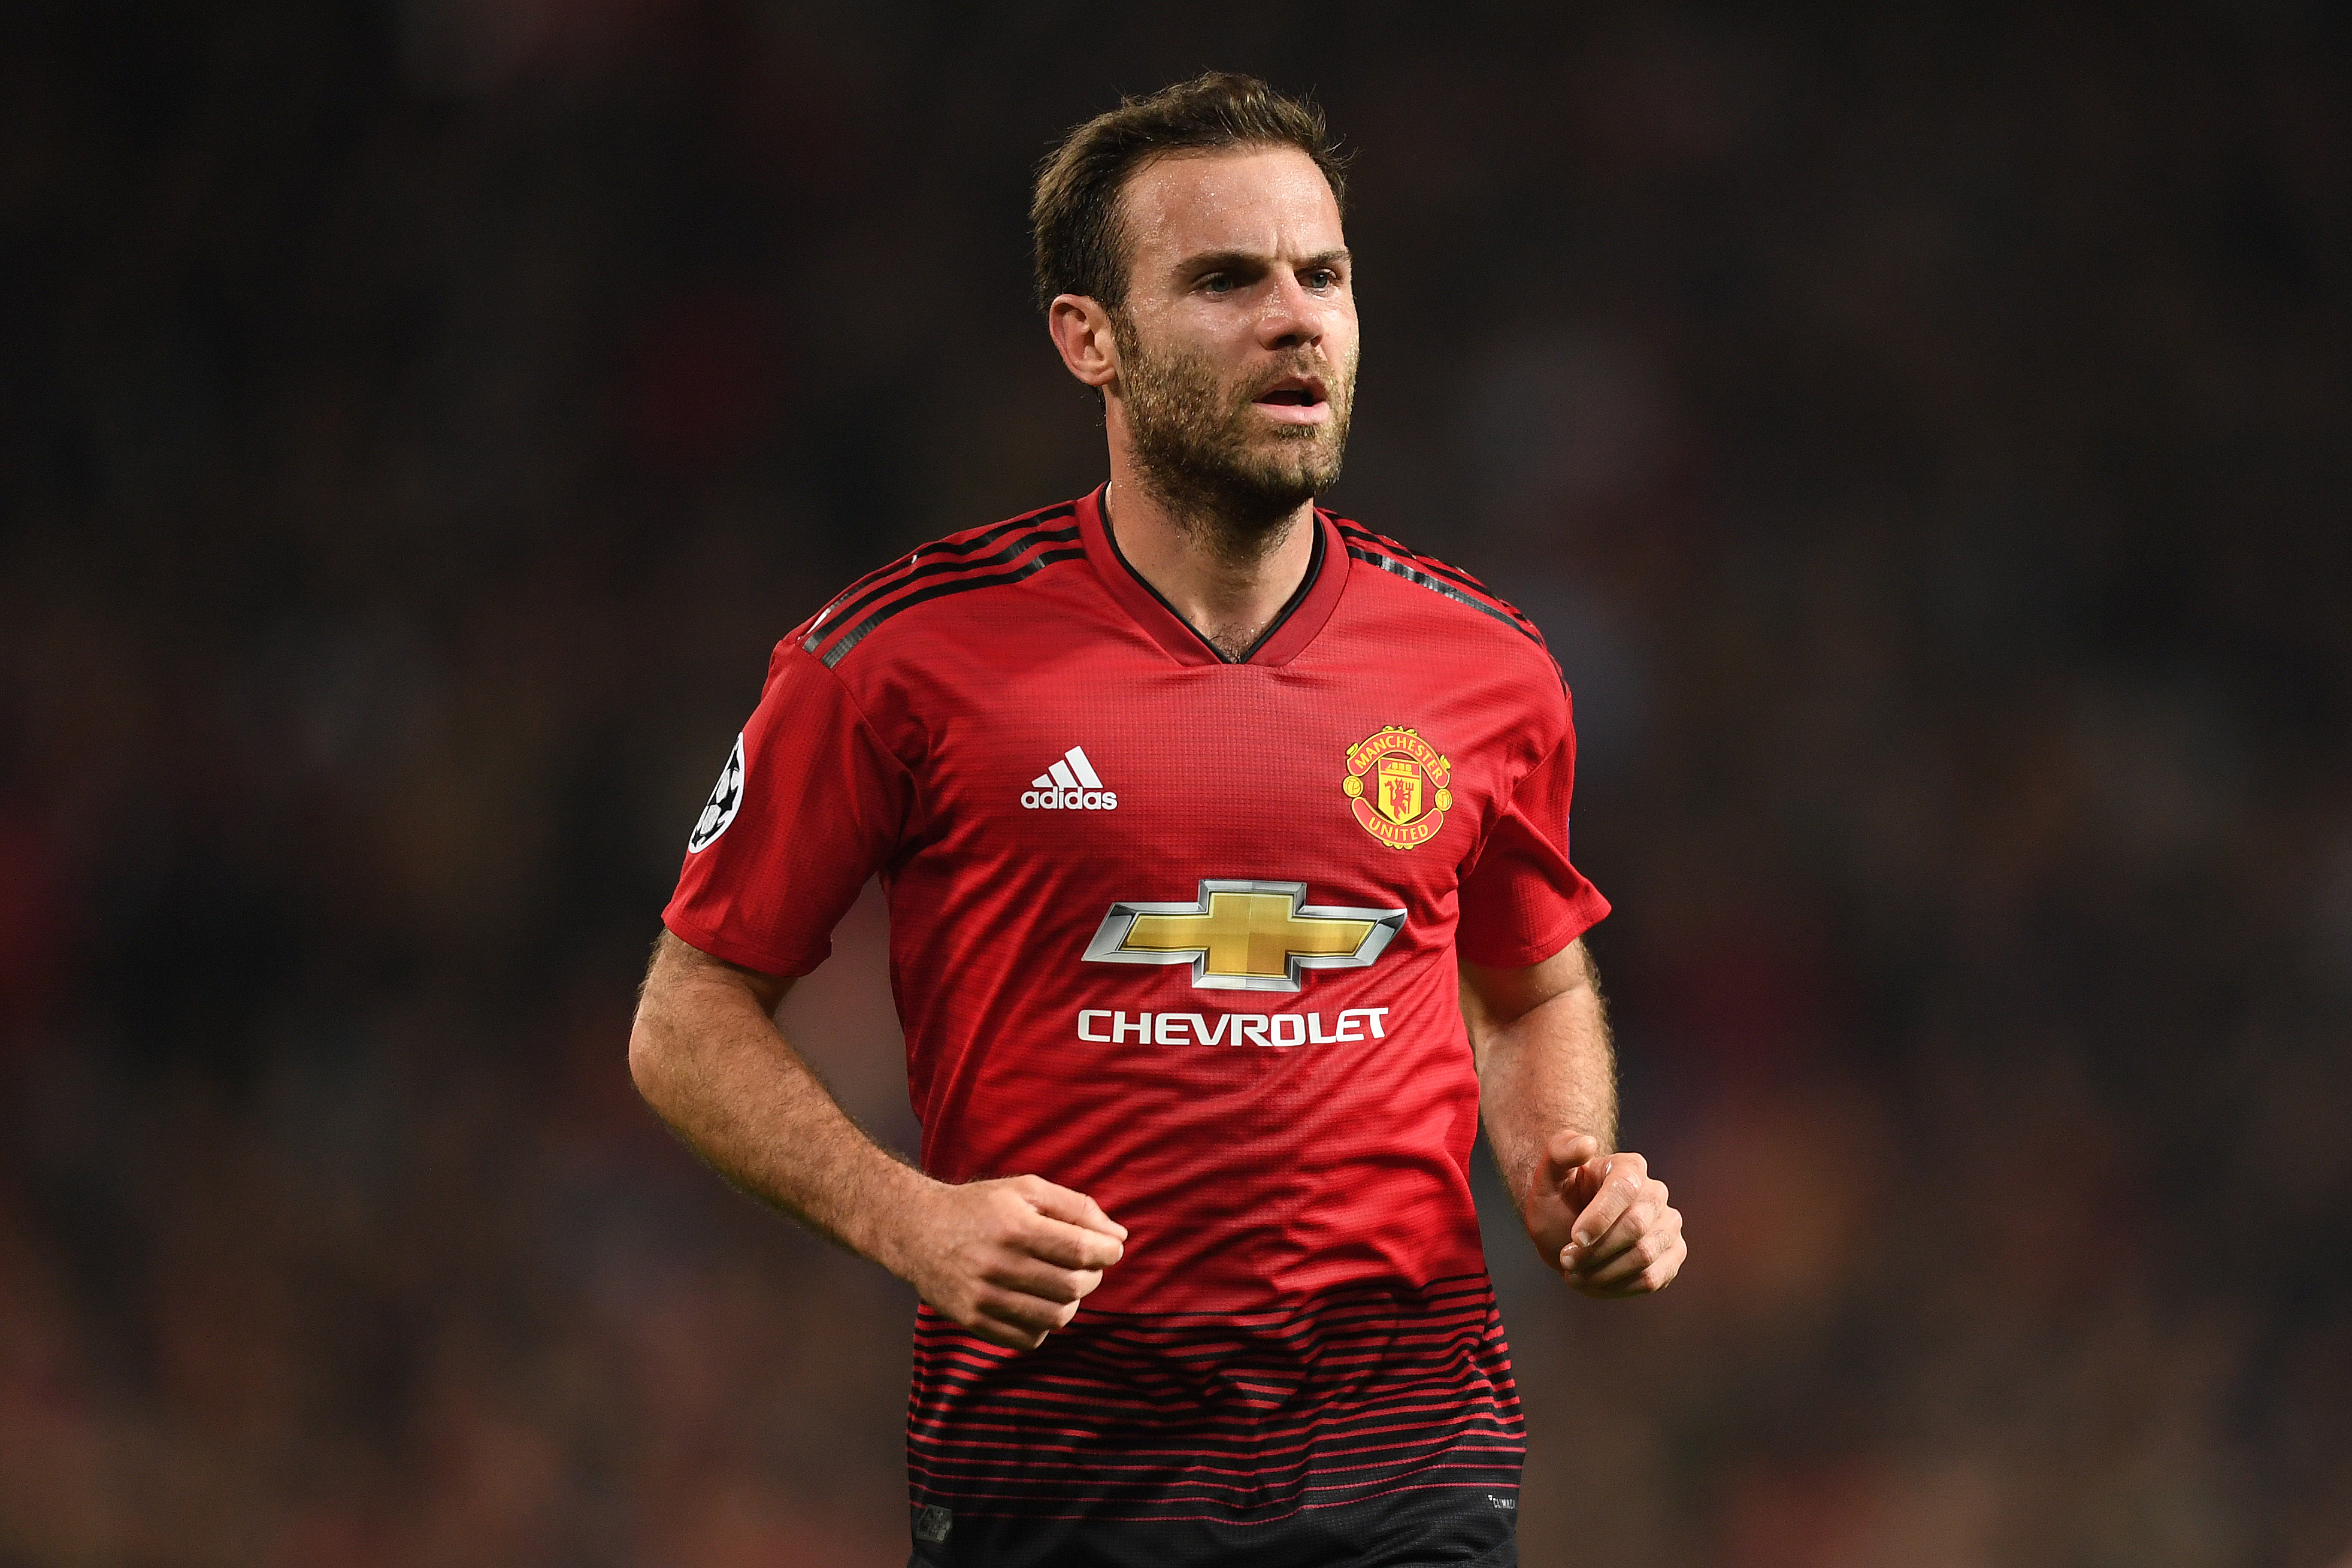 MANCHESTER, ENGLAND - OCTOBER 23:  Juan Mata of Manchester United looks on during the Group H match of the UEFA Champions League between Manchester United and Juventus at Old Trafford on October 23, 2018 in Manchester, United Kingdom.  (Photo by Michael Regan/Getty Images)